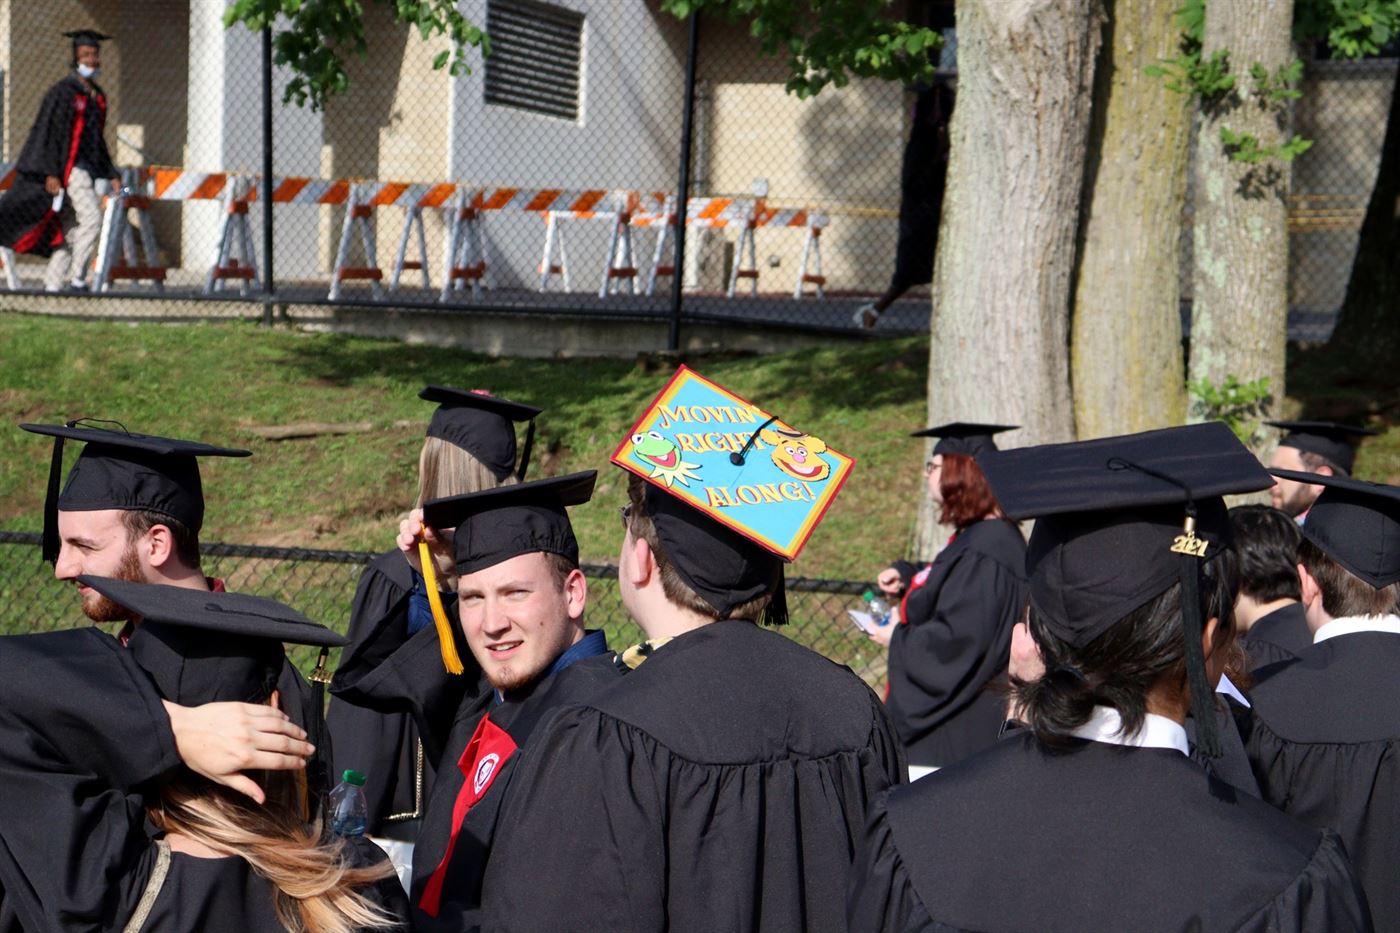 Many students chose to decorate their hats to express themselves. John LaRosa | The Montclarion